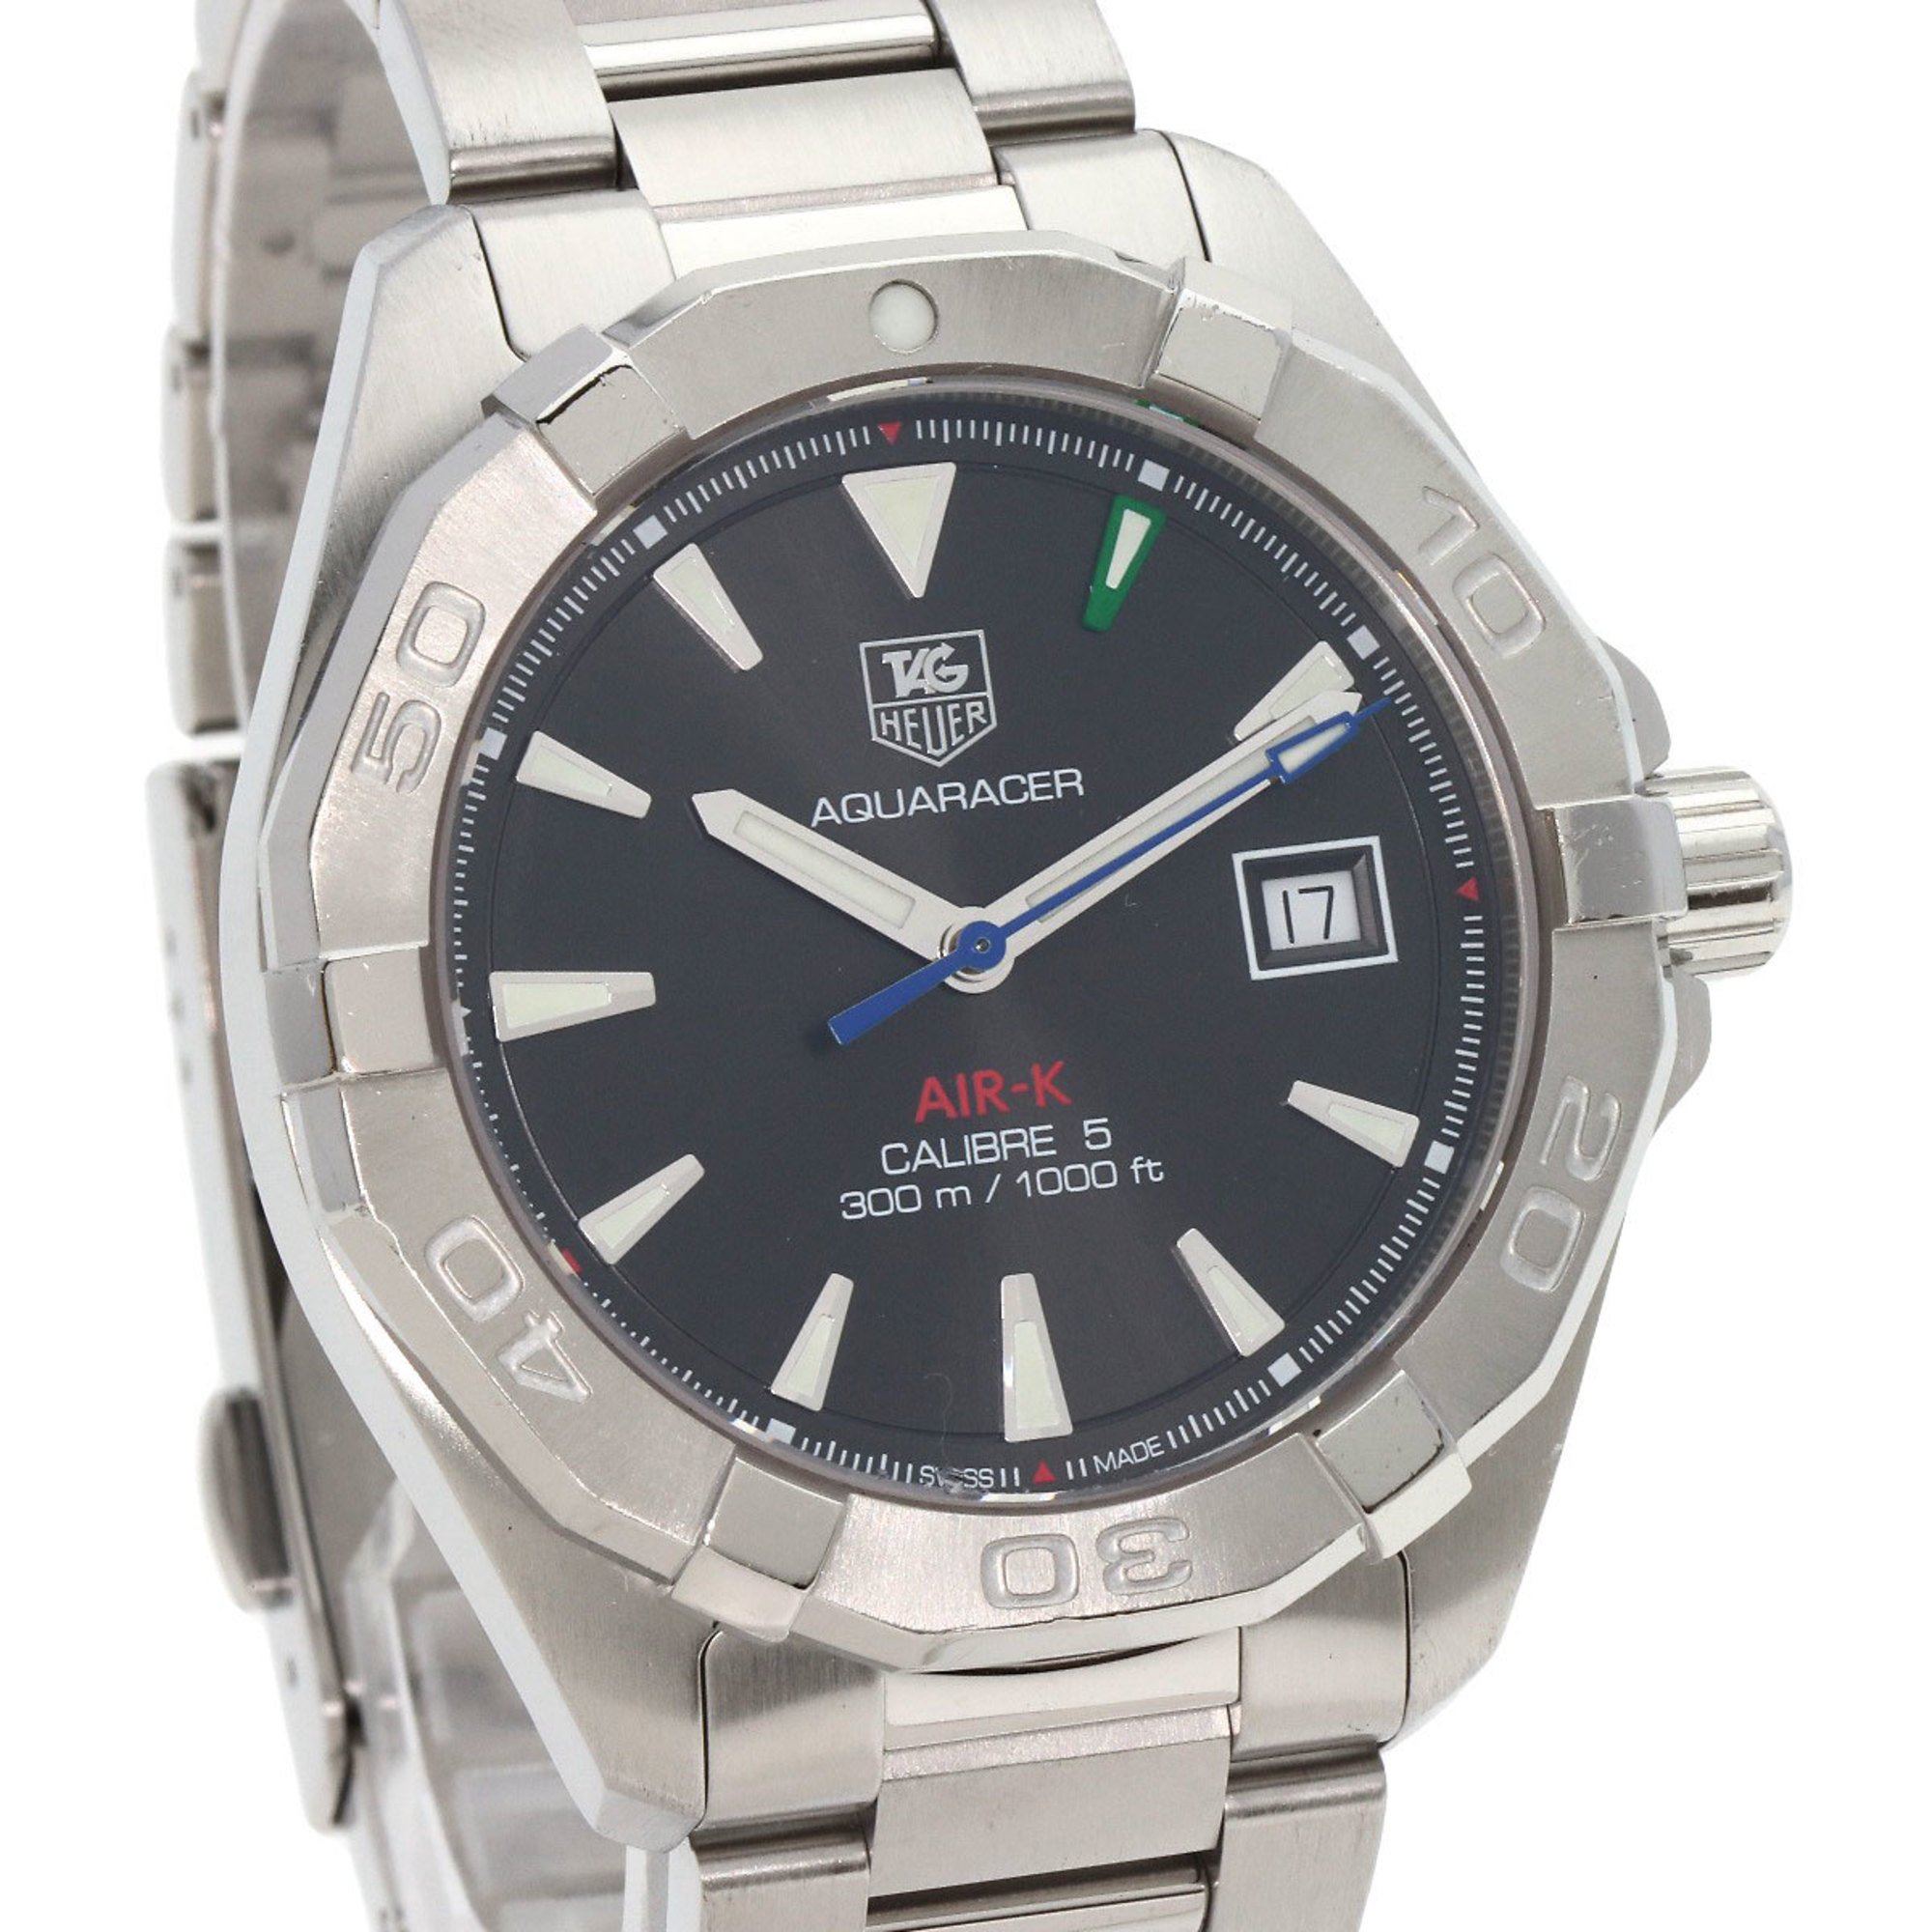 TAG Heuer WAY2116.BA0910 Aquaracer Calibre 5 Kei Nishikori Model Limited to 400 pieces Stainless Steel/SS Men's Watch HEUER